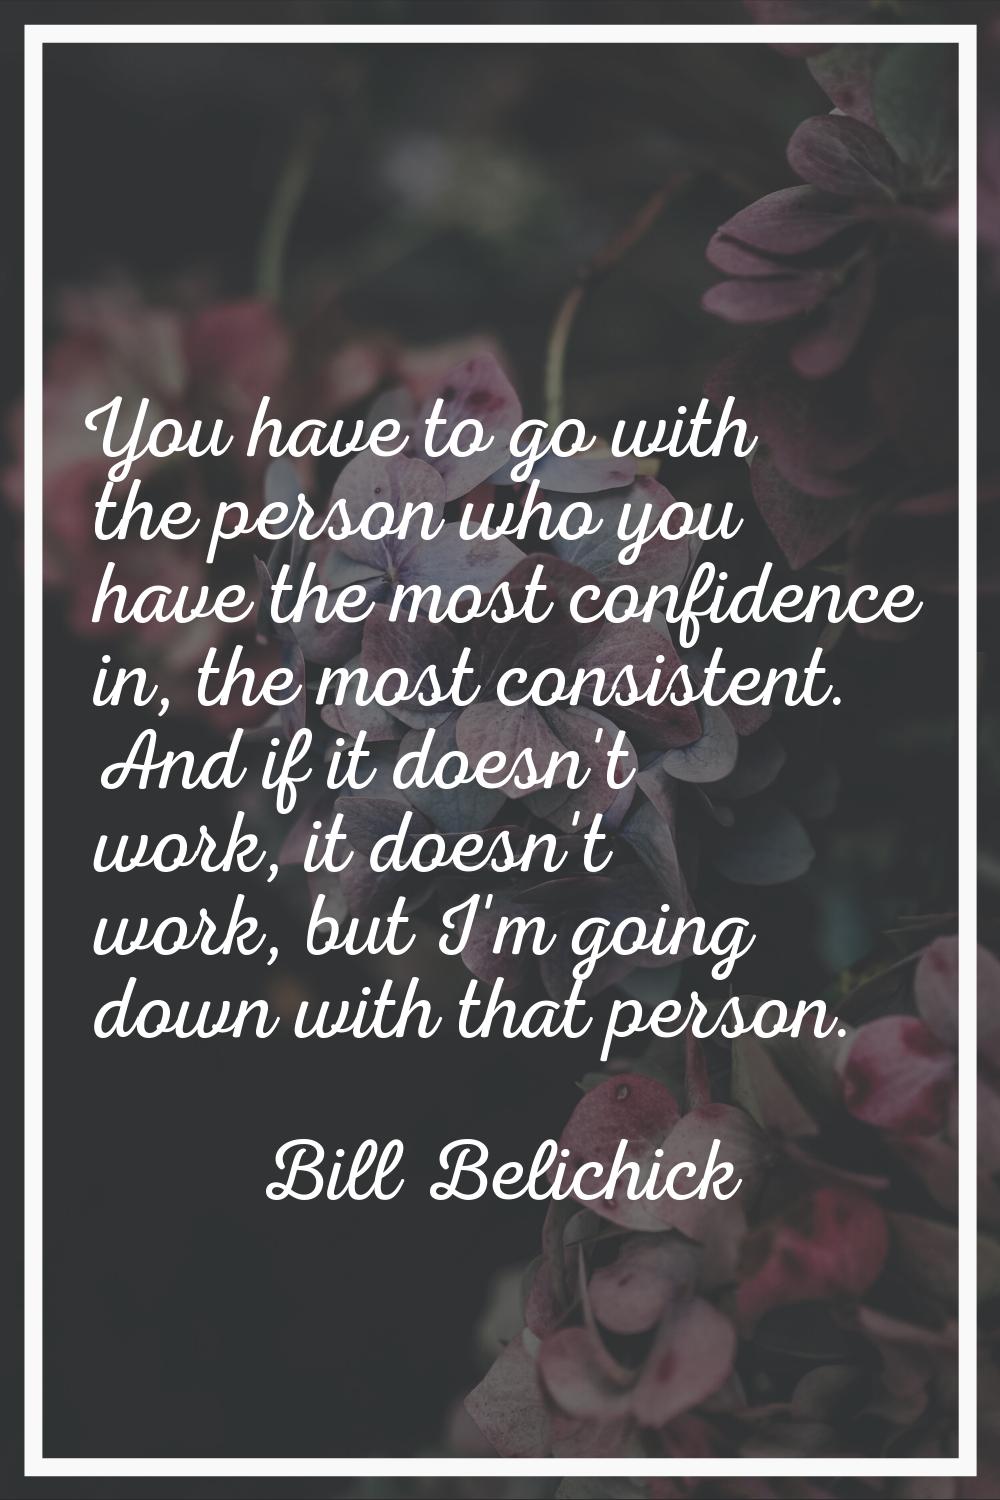 You have to go with the person who you have the most confidence in, the most consistent. And if it 